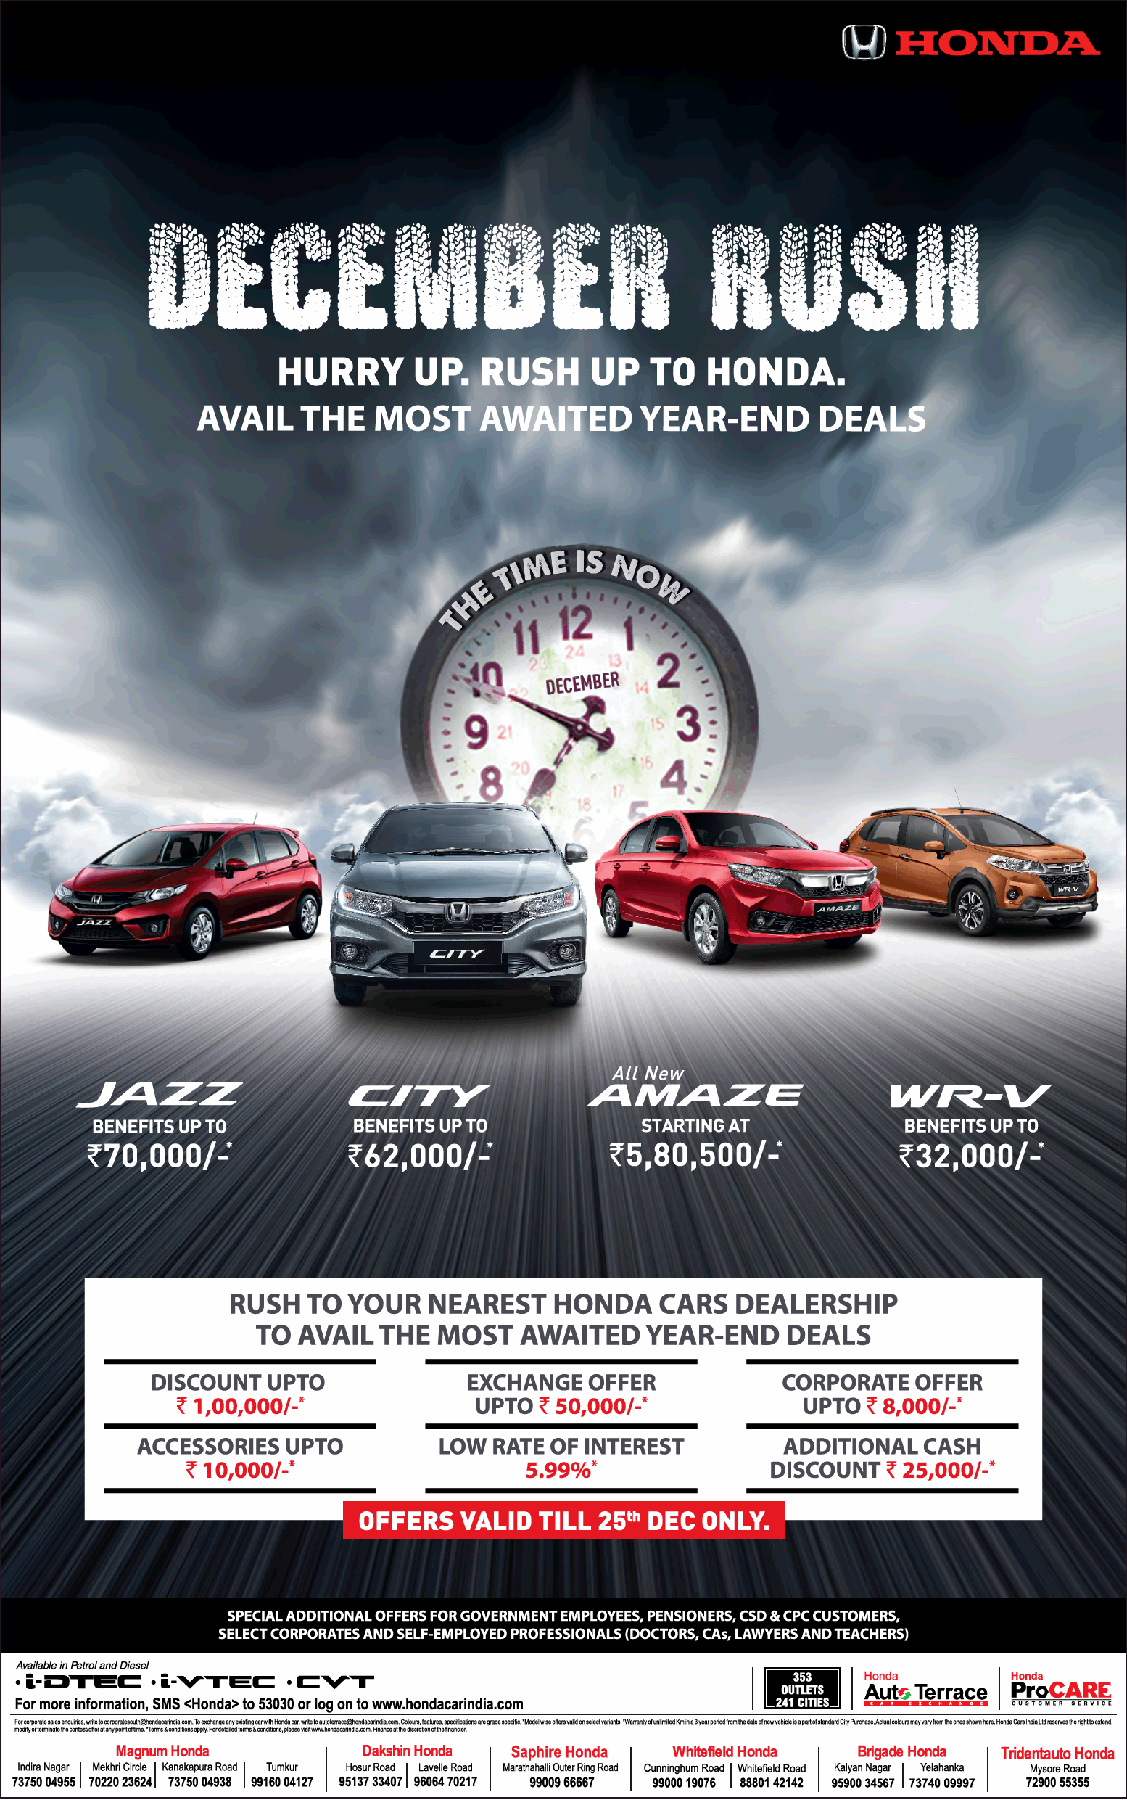 Honda December Rush Avail The Most Awaited Year End Deals Ad Advert